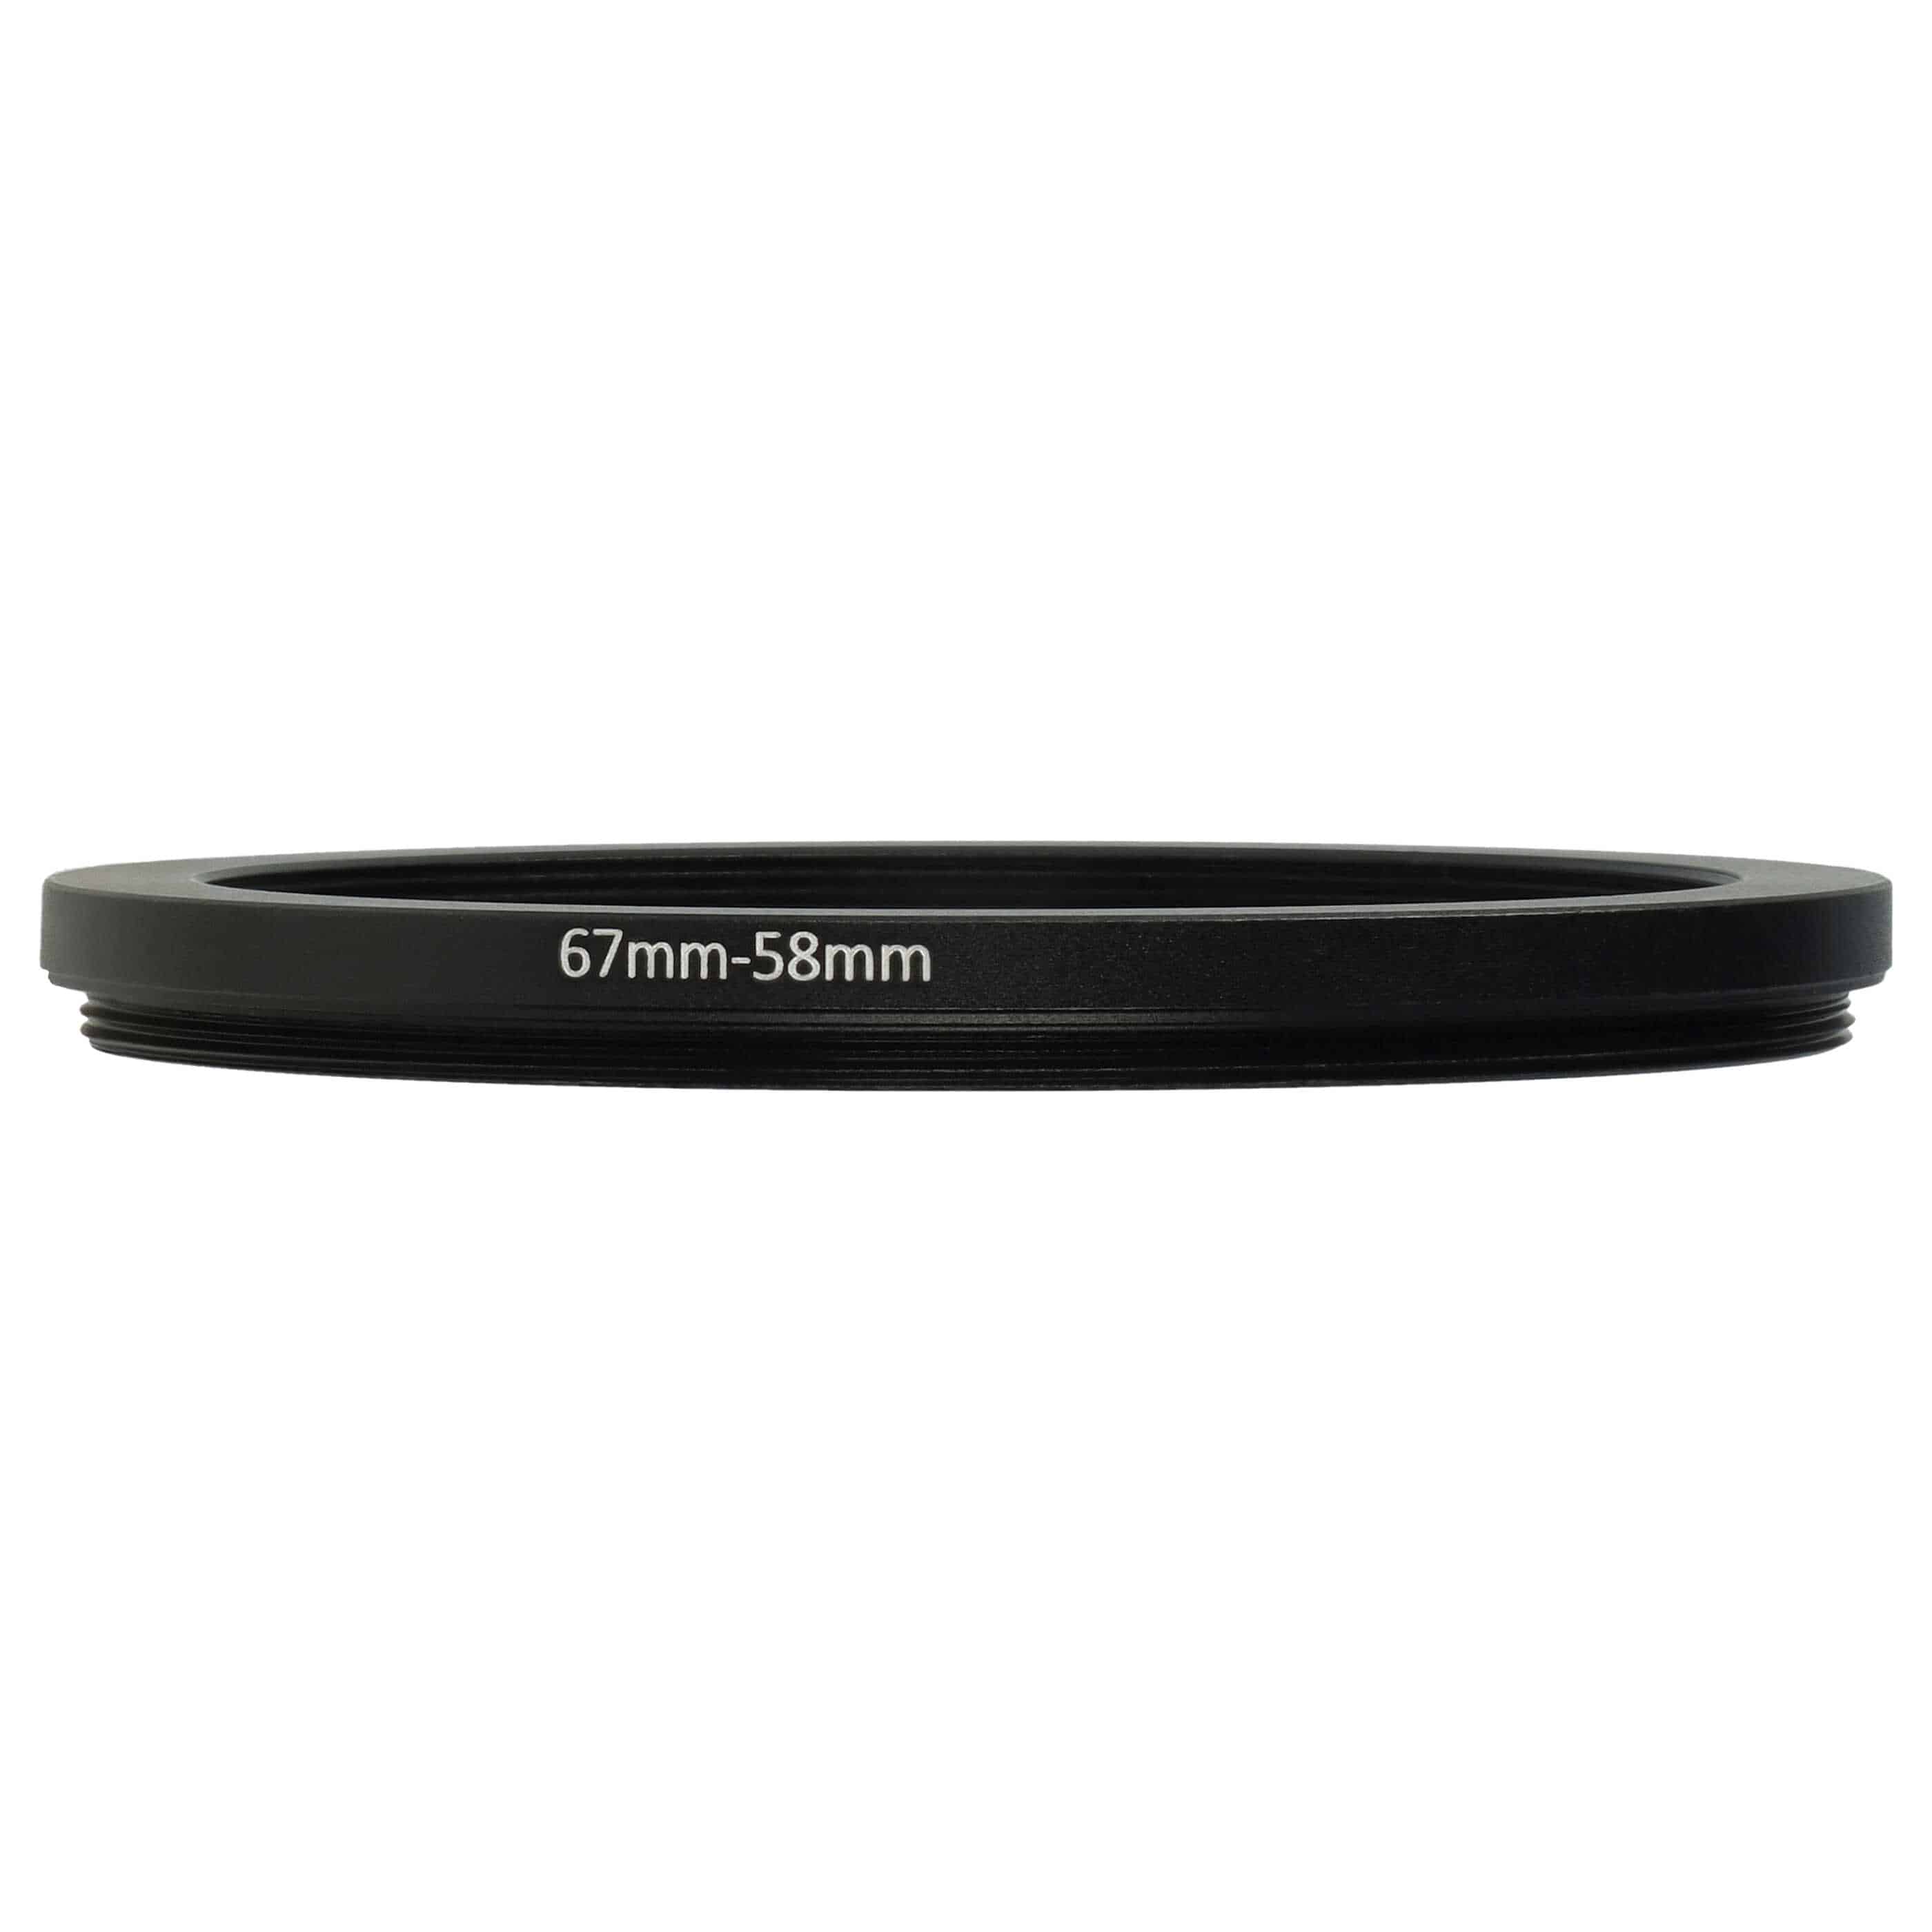 Step-Down Ring Adapter from 67 mm to 58 mm for various Camera Lenses